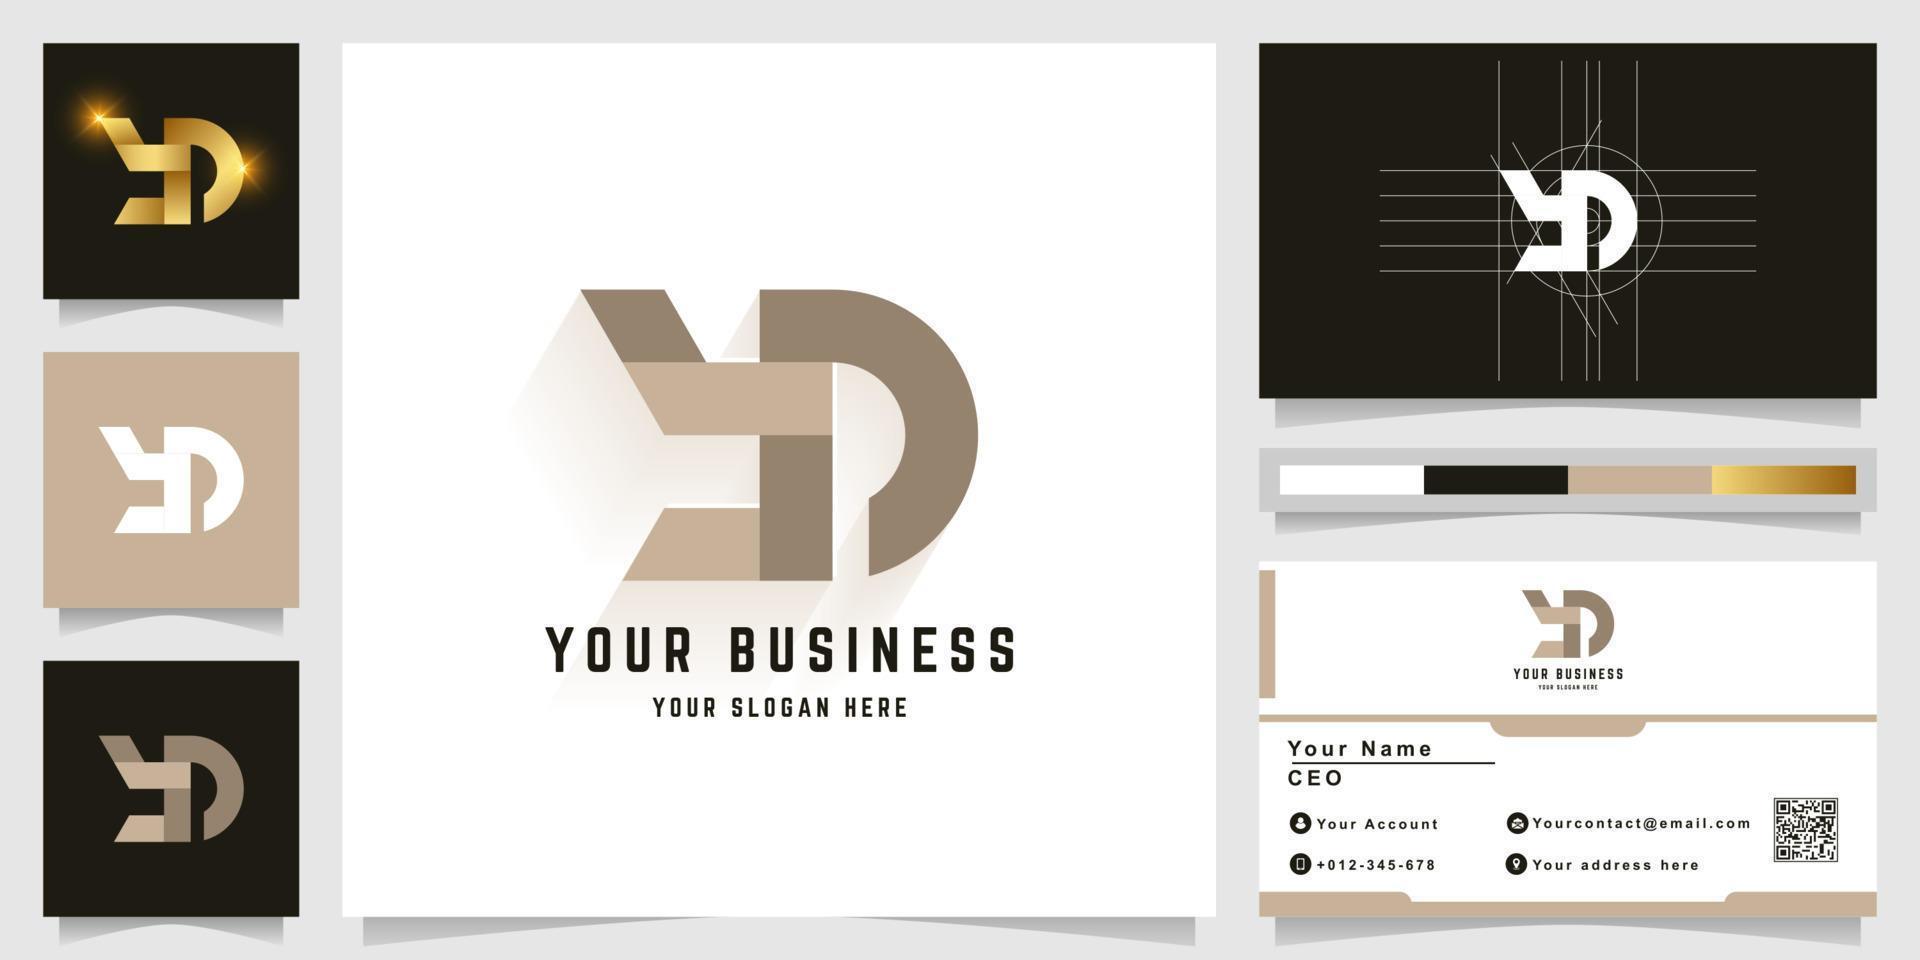 Letter YD or Ye monogram logo with business card design vector